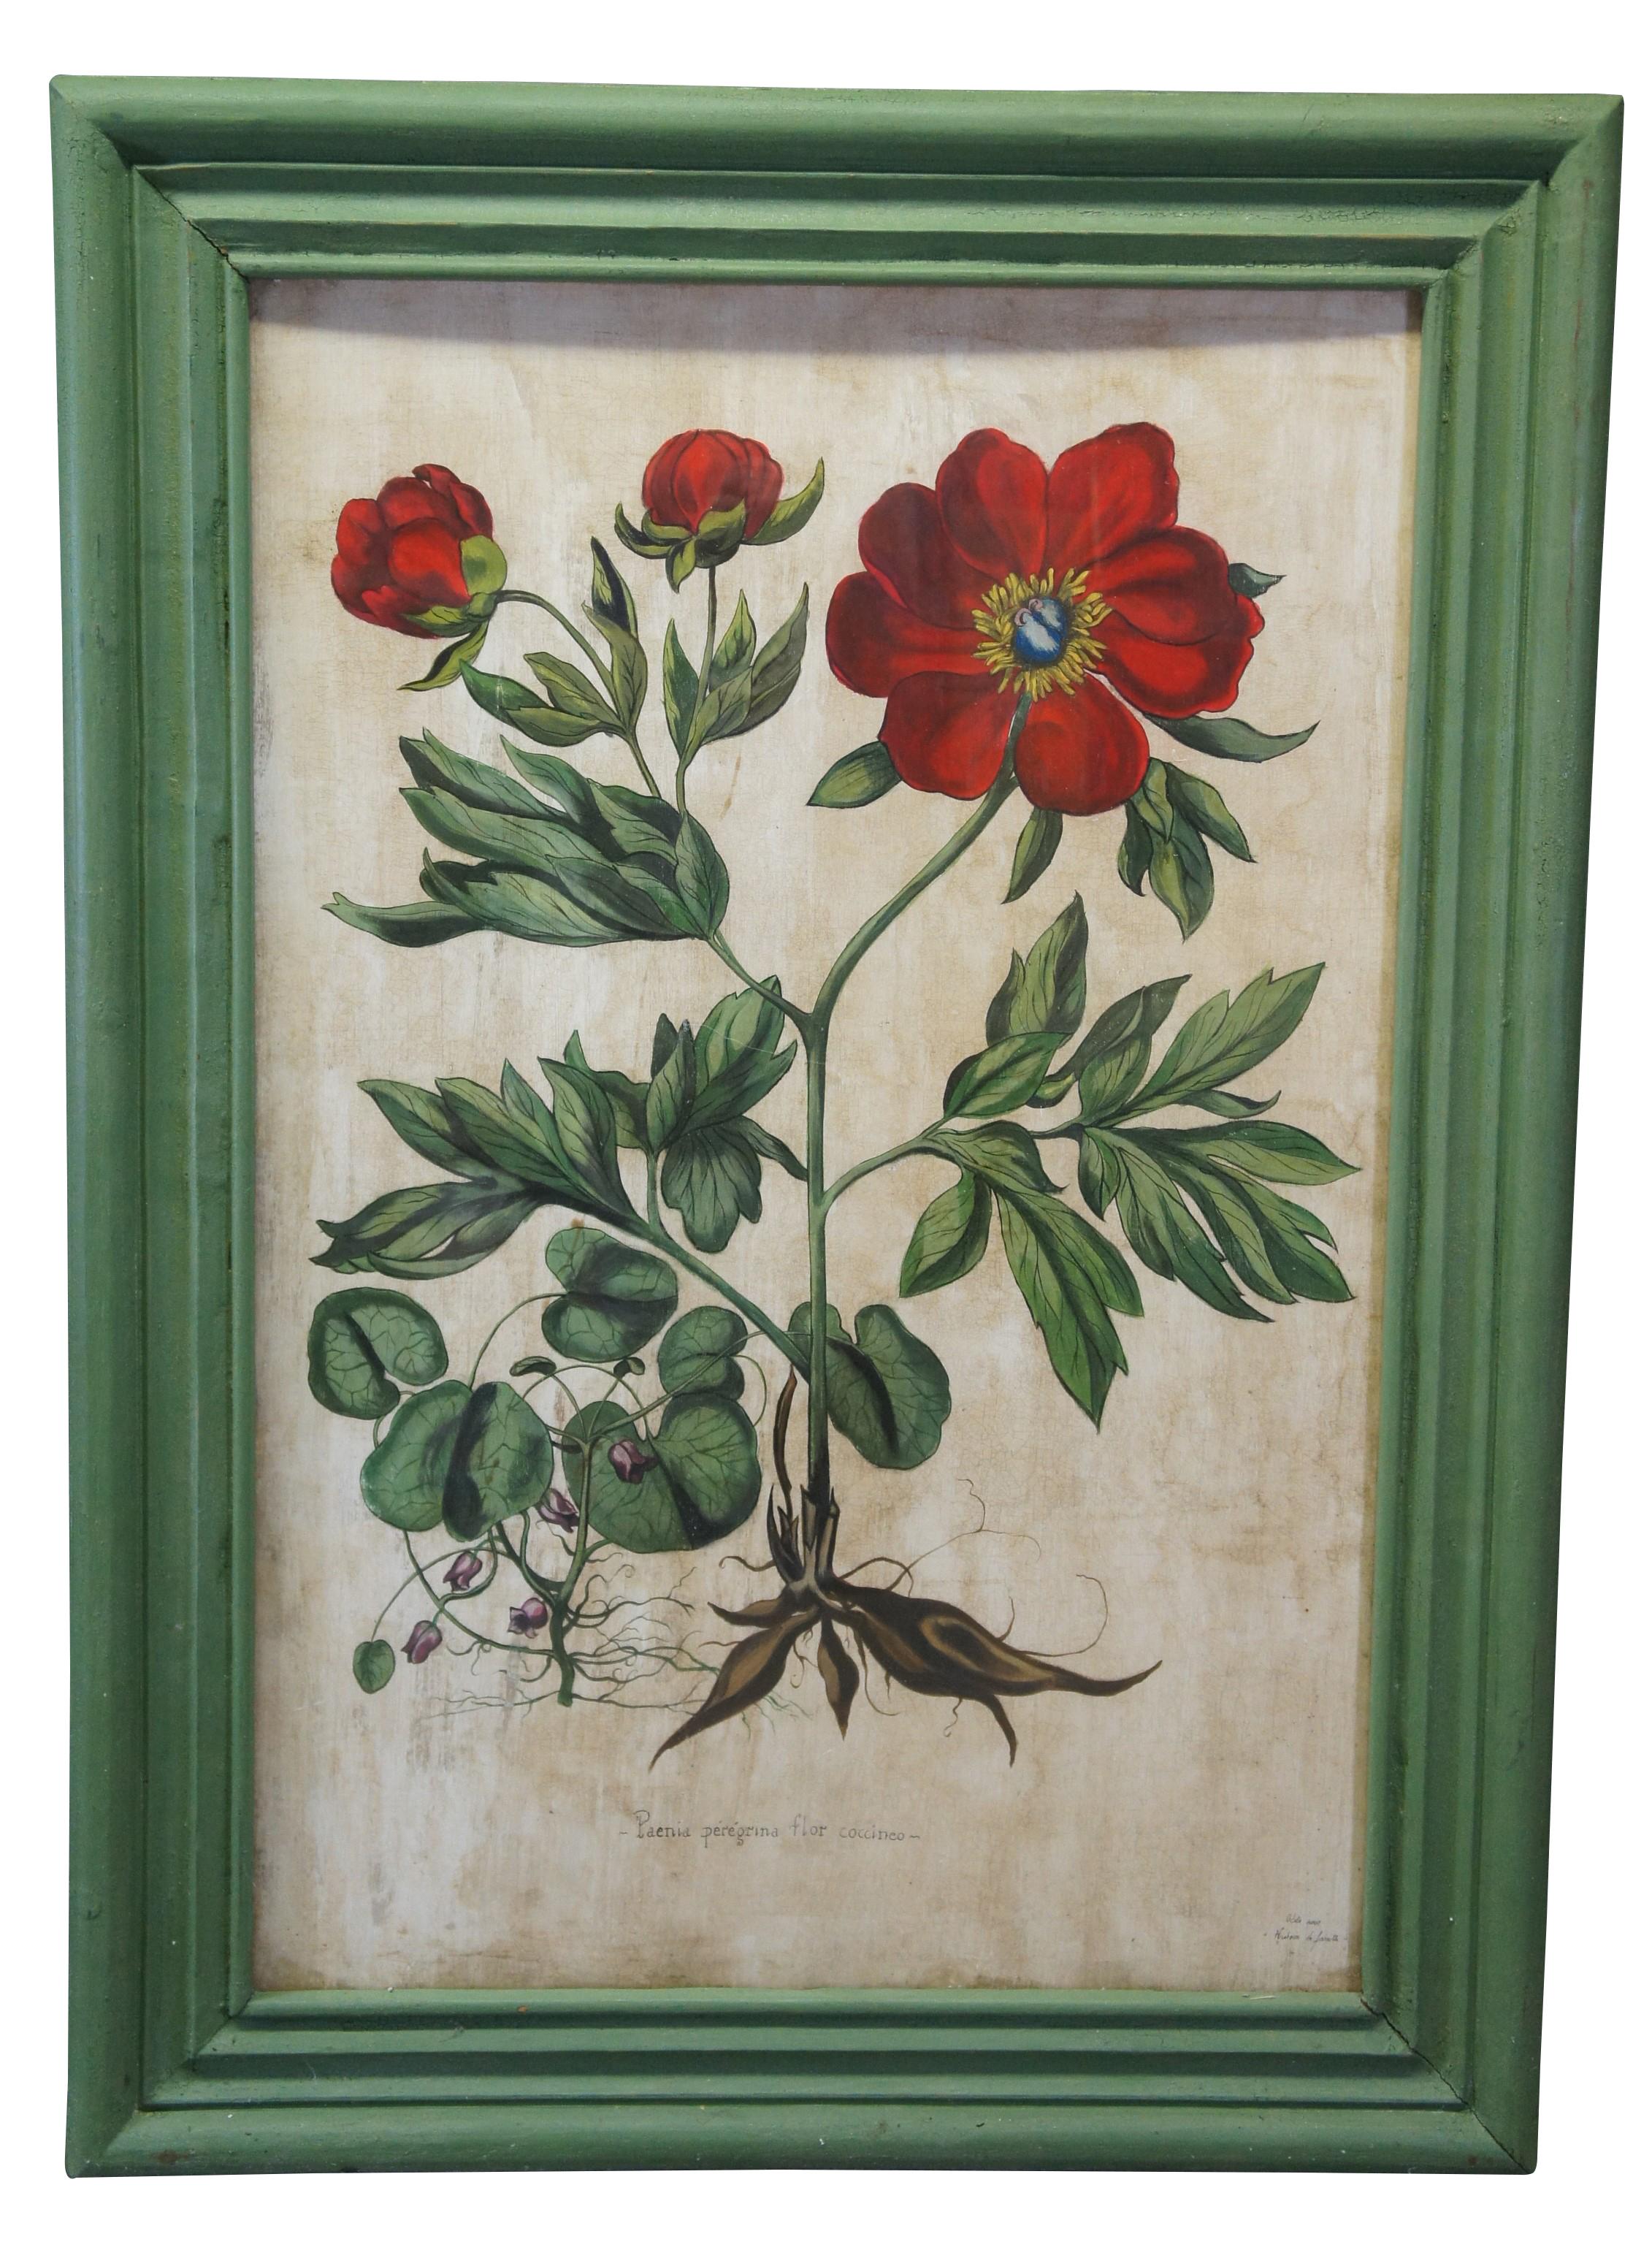 A pair of impressive vibrant hand painted botanical still life florals, featuring Paenia peregrina flor coccineo and Corona imperialis polyanthos.  Painted on a thin board, framed behind glass in green crackle painted frame. Purchased from an